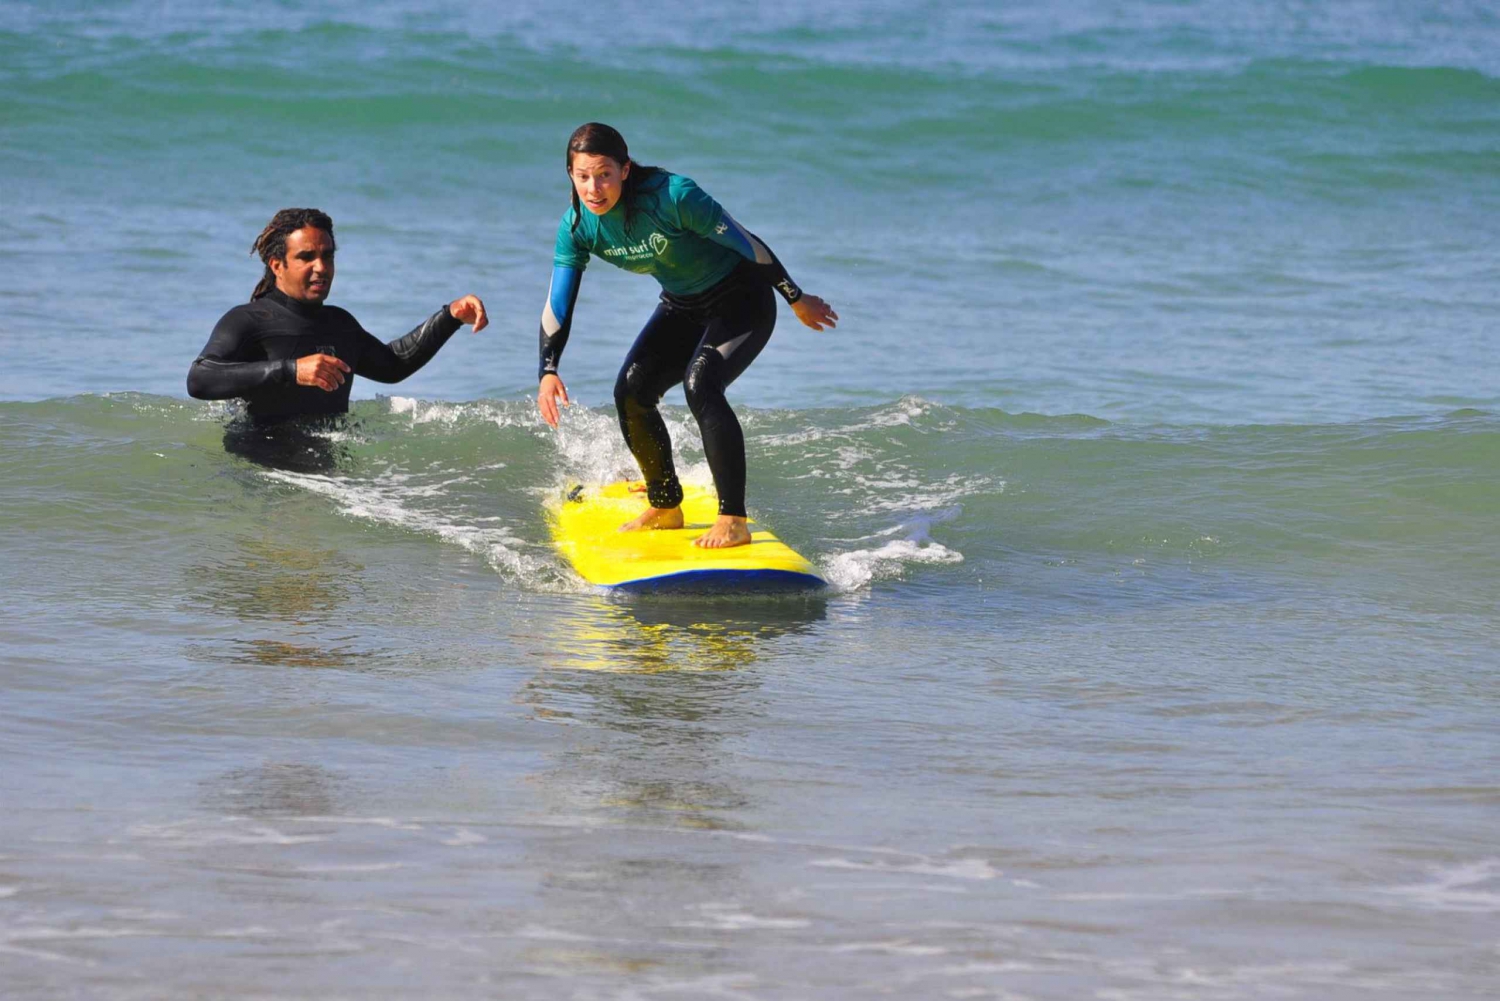 Guided Surfing Tour to Essaouira from Marrakech